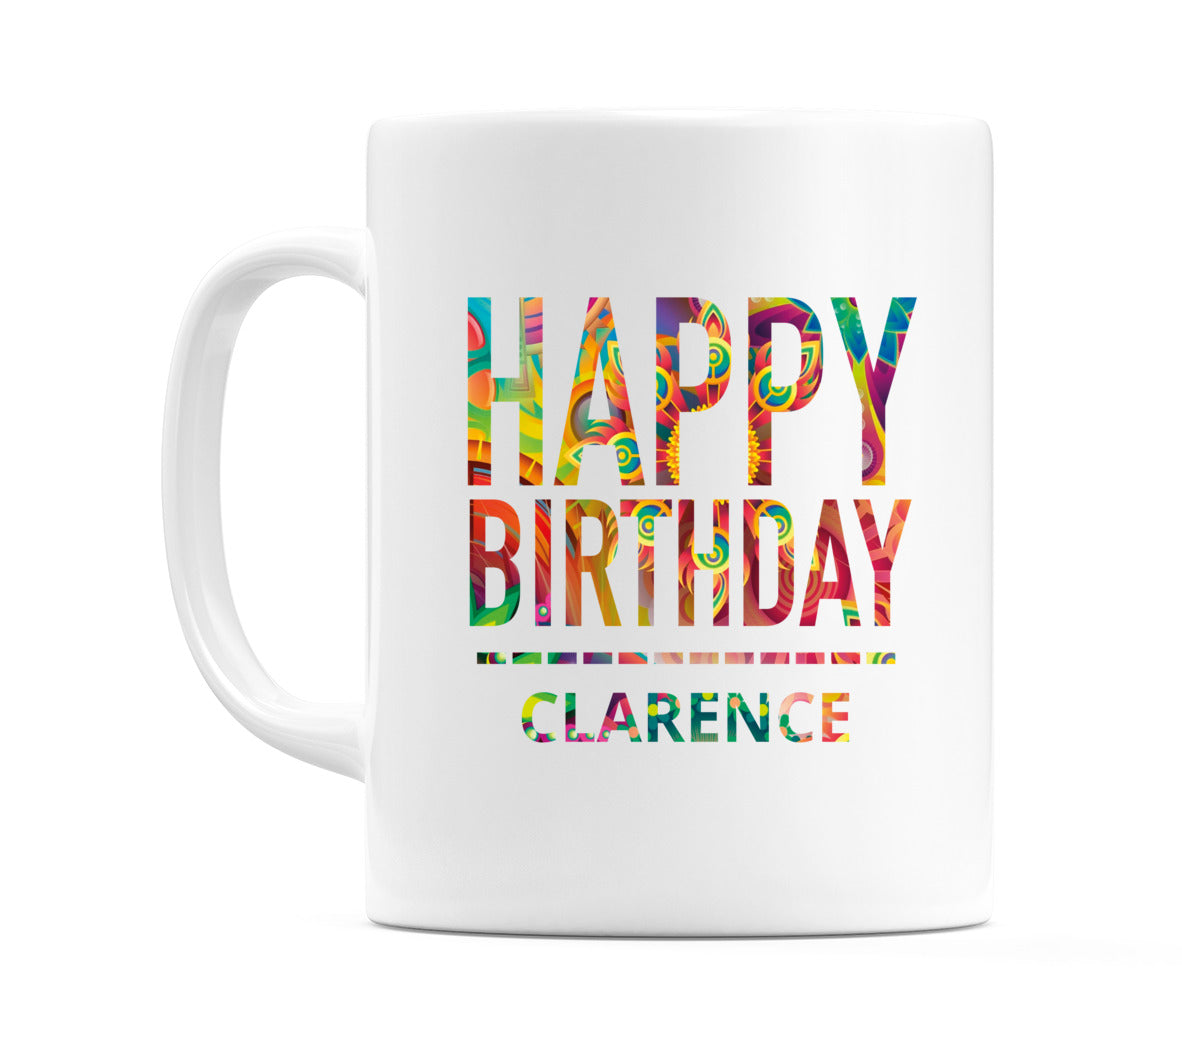 Happy Birthday Clarence (Tie Dye Effect) Mug Cup by WeDoMugs